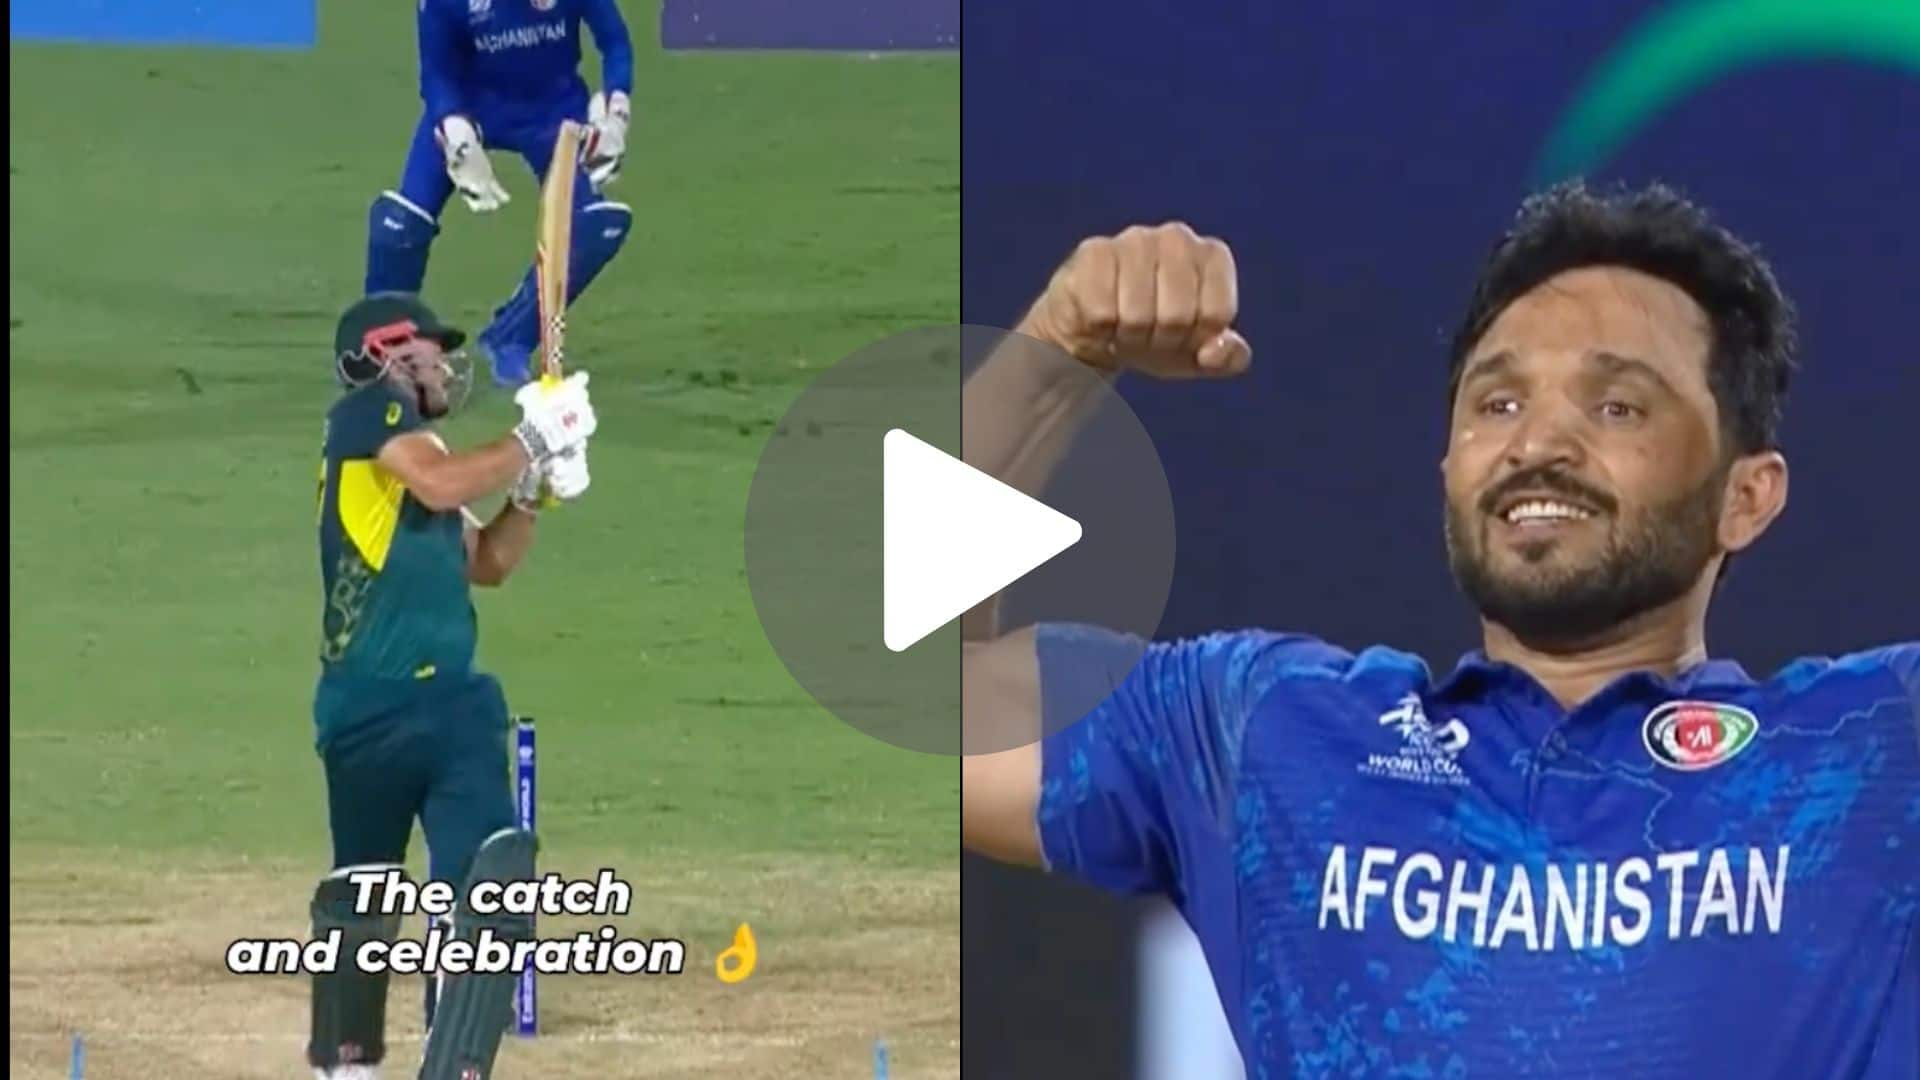 [Watch] Gulbadin Flexes His Muscles After Dismissing Marcus Stoinis With A 'Nasty' Bouncer